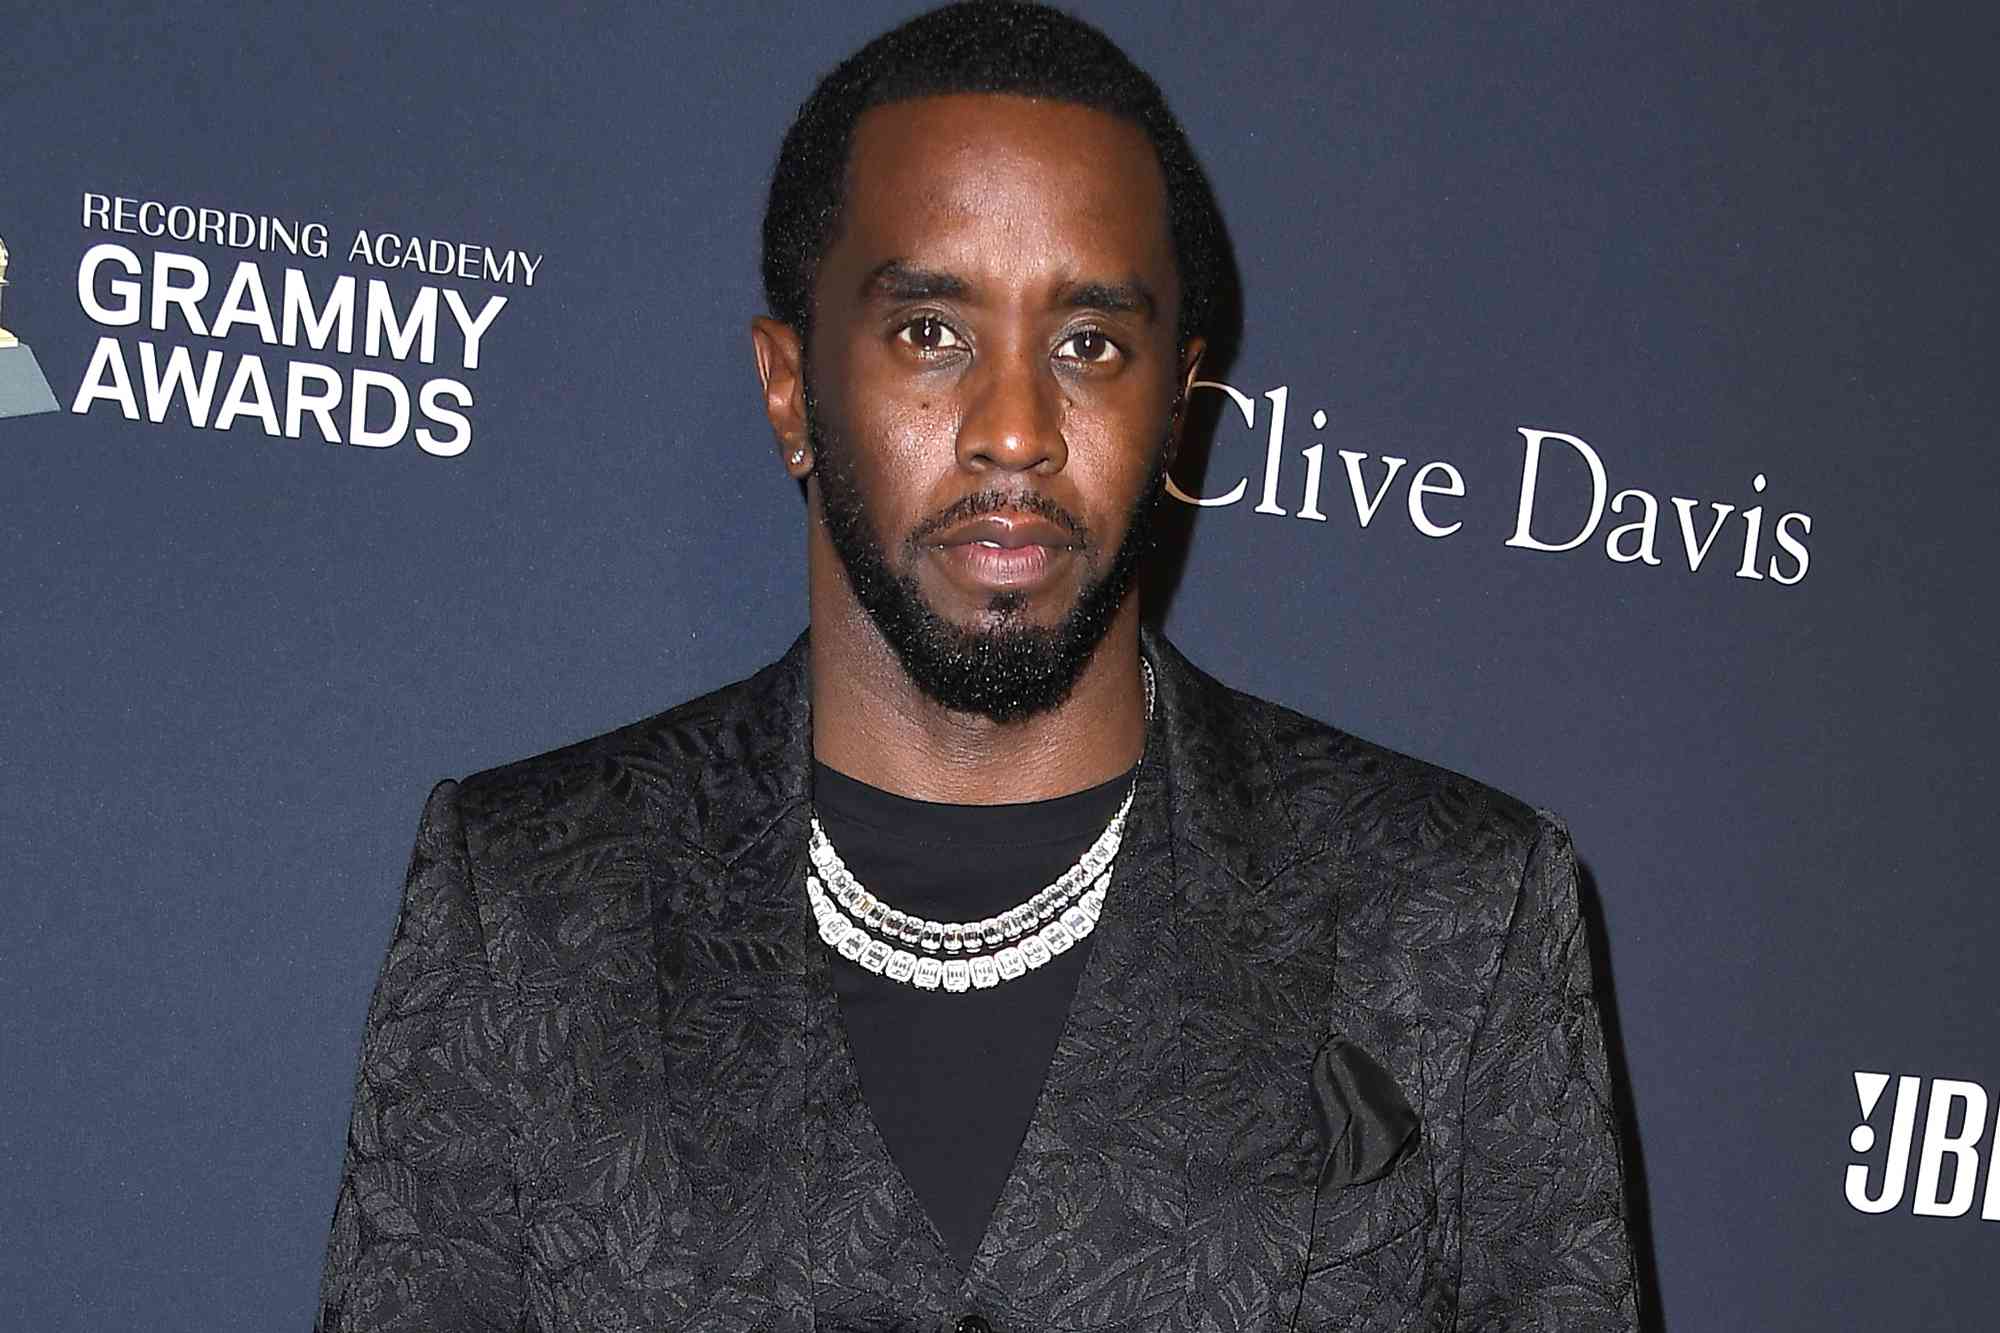 Sean 'Diddy' Combs Files Motion to Dismiss Some Claims in Sexual Assault Lawsuit Over 1991 Allegations